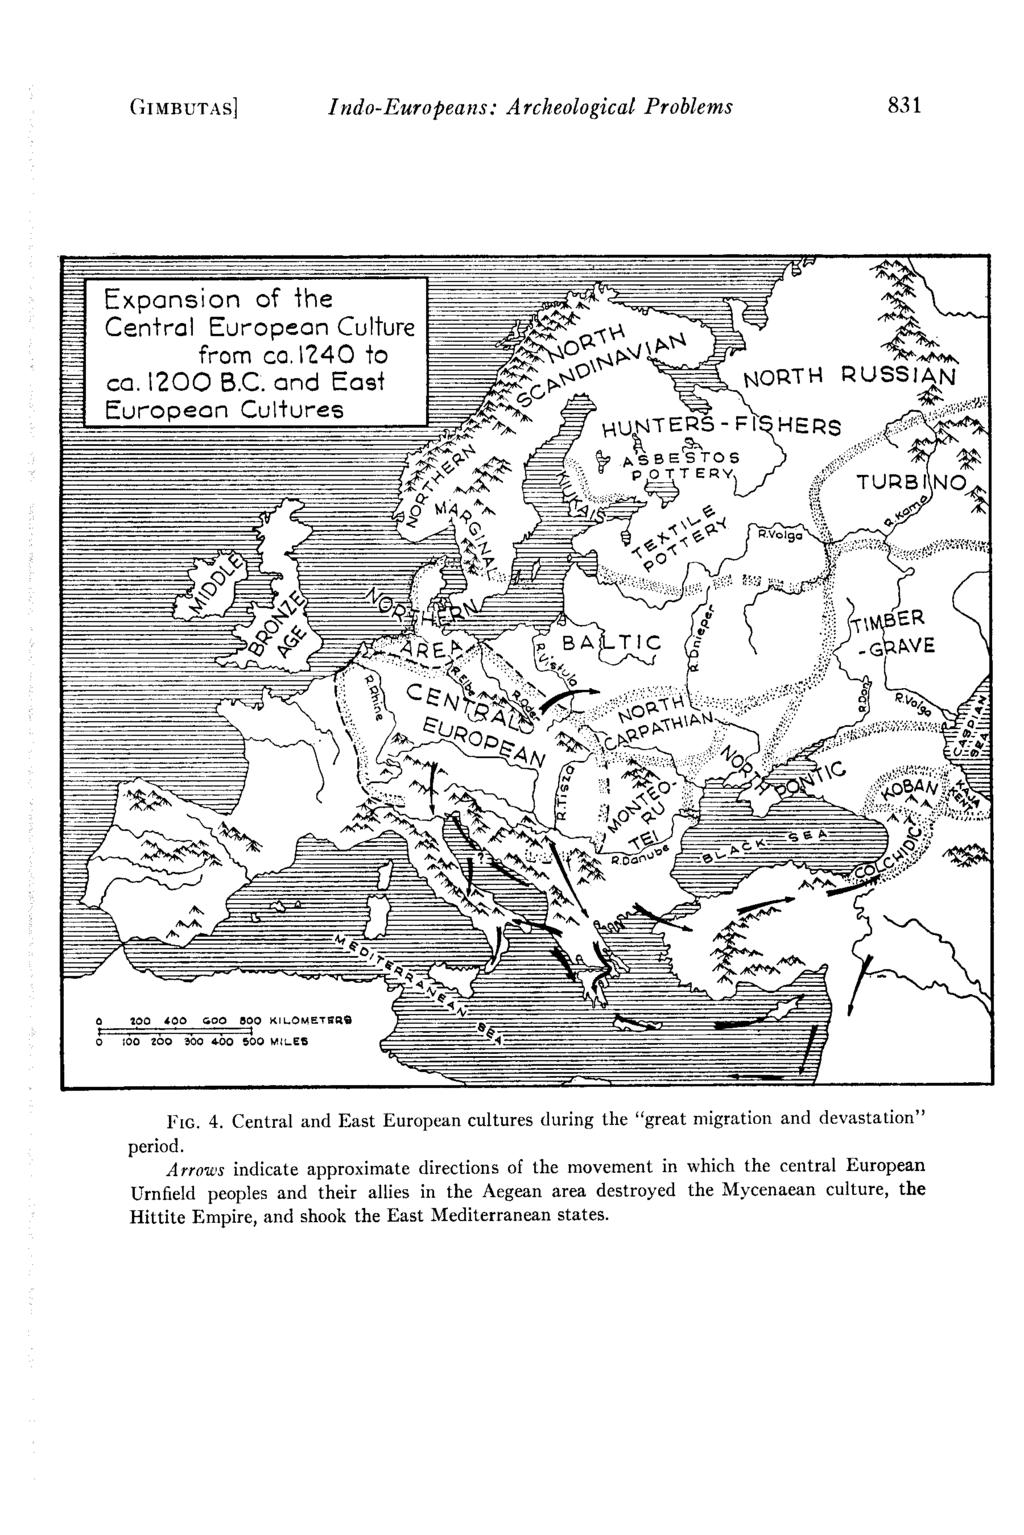 GIMBUTAS] Indo-Europeans: Archeological Problems 83 1 FIG. 4. Central and East European cultures during the great migration and devastation period.